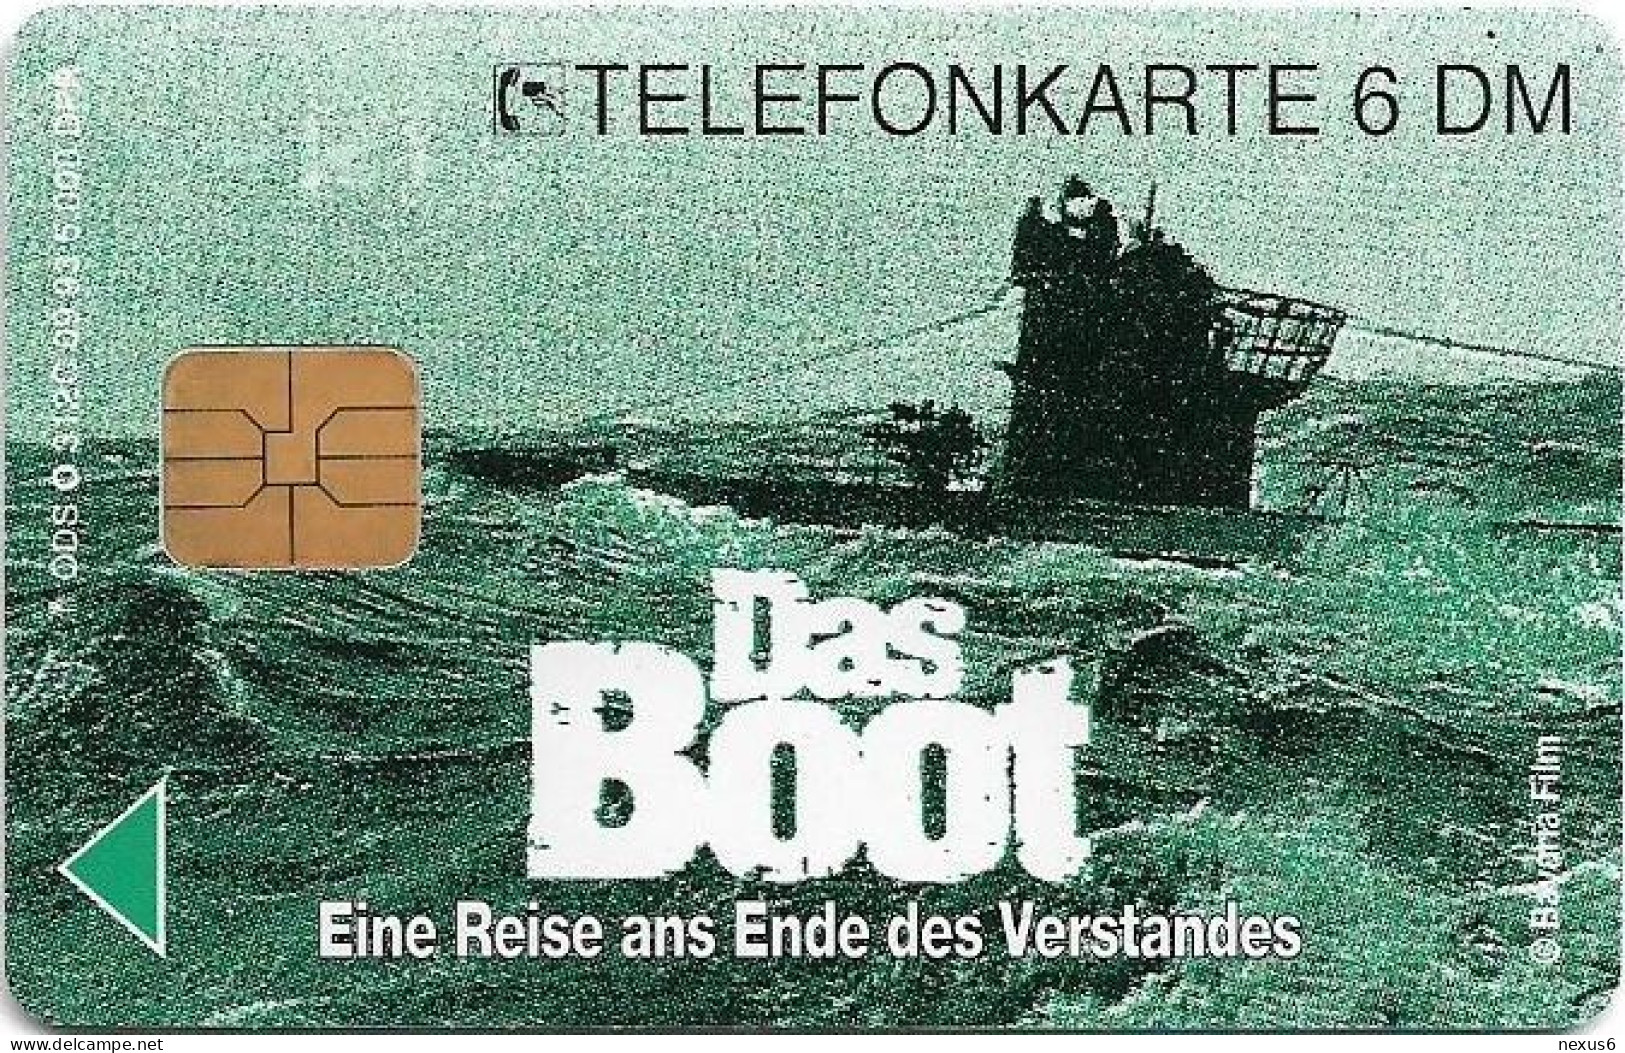 Germany - Das Boot (Film) 3 – Concentration Camps - O 0312C - 09.1993, 6DM, 5.000ex, Mint - O-Series : Customers Sets